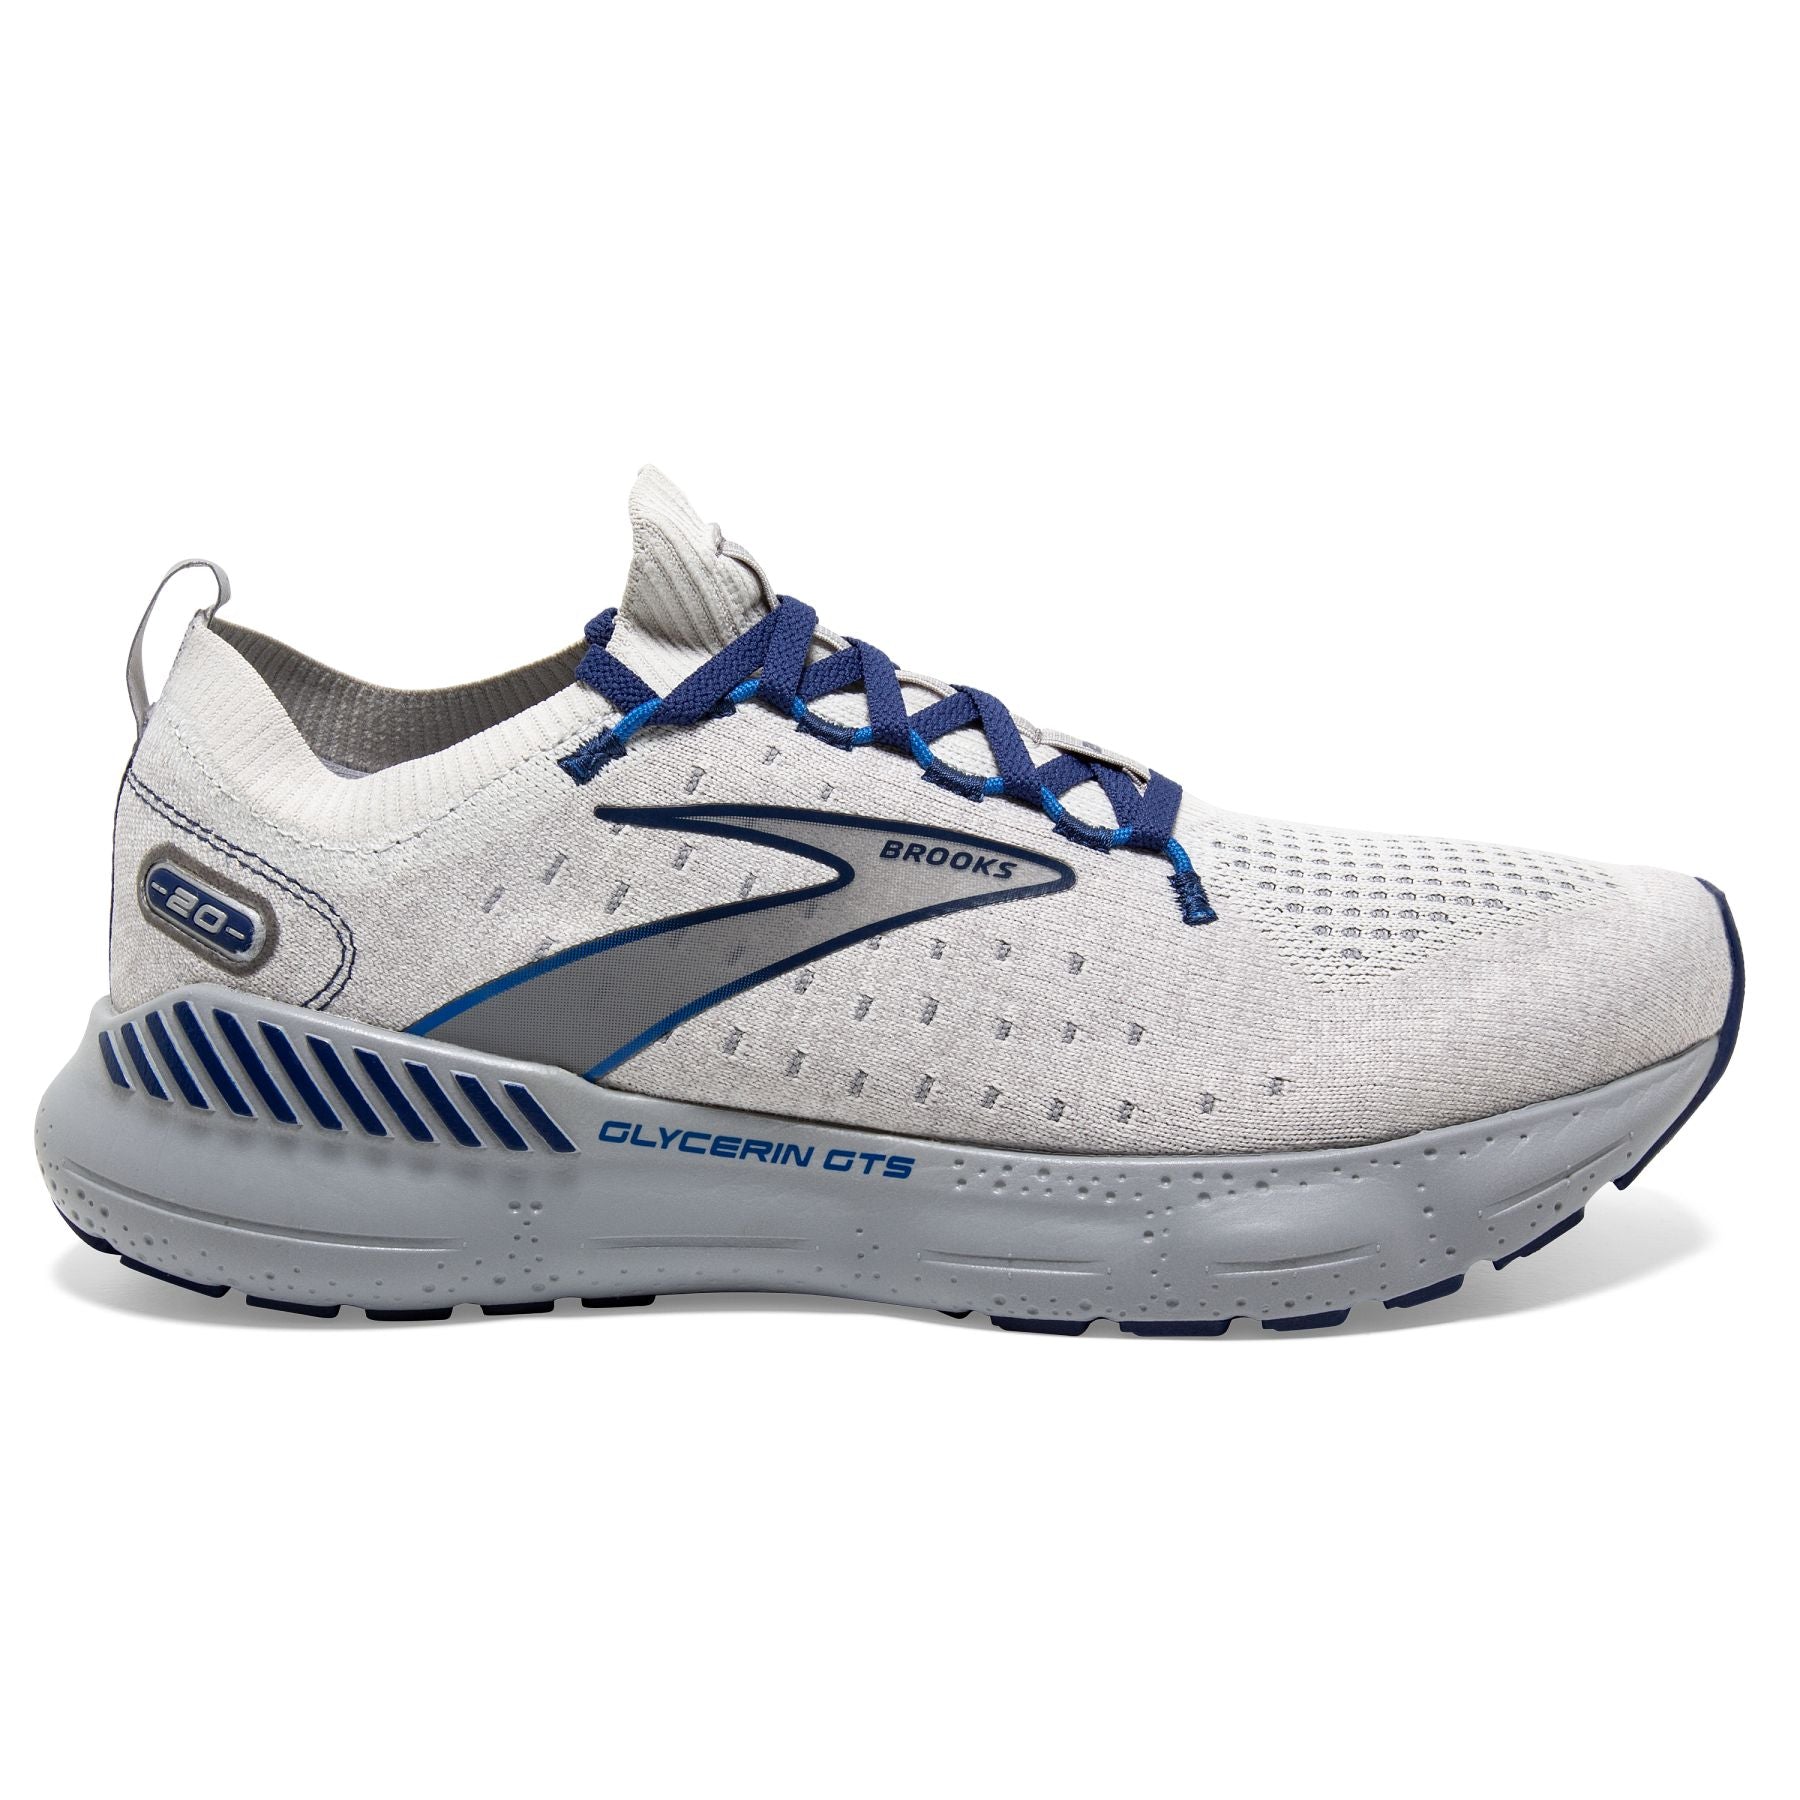 Lateral view of the Men's Glycerin Stealthfit GTS 20 in Oyster/Alloy/Blue Depths